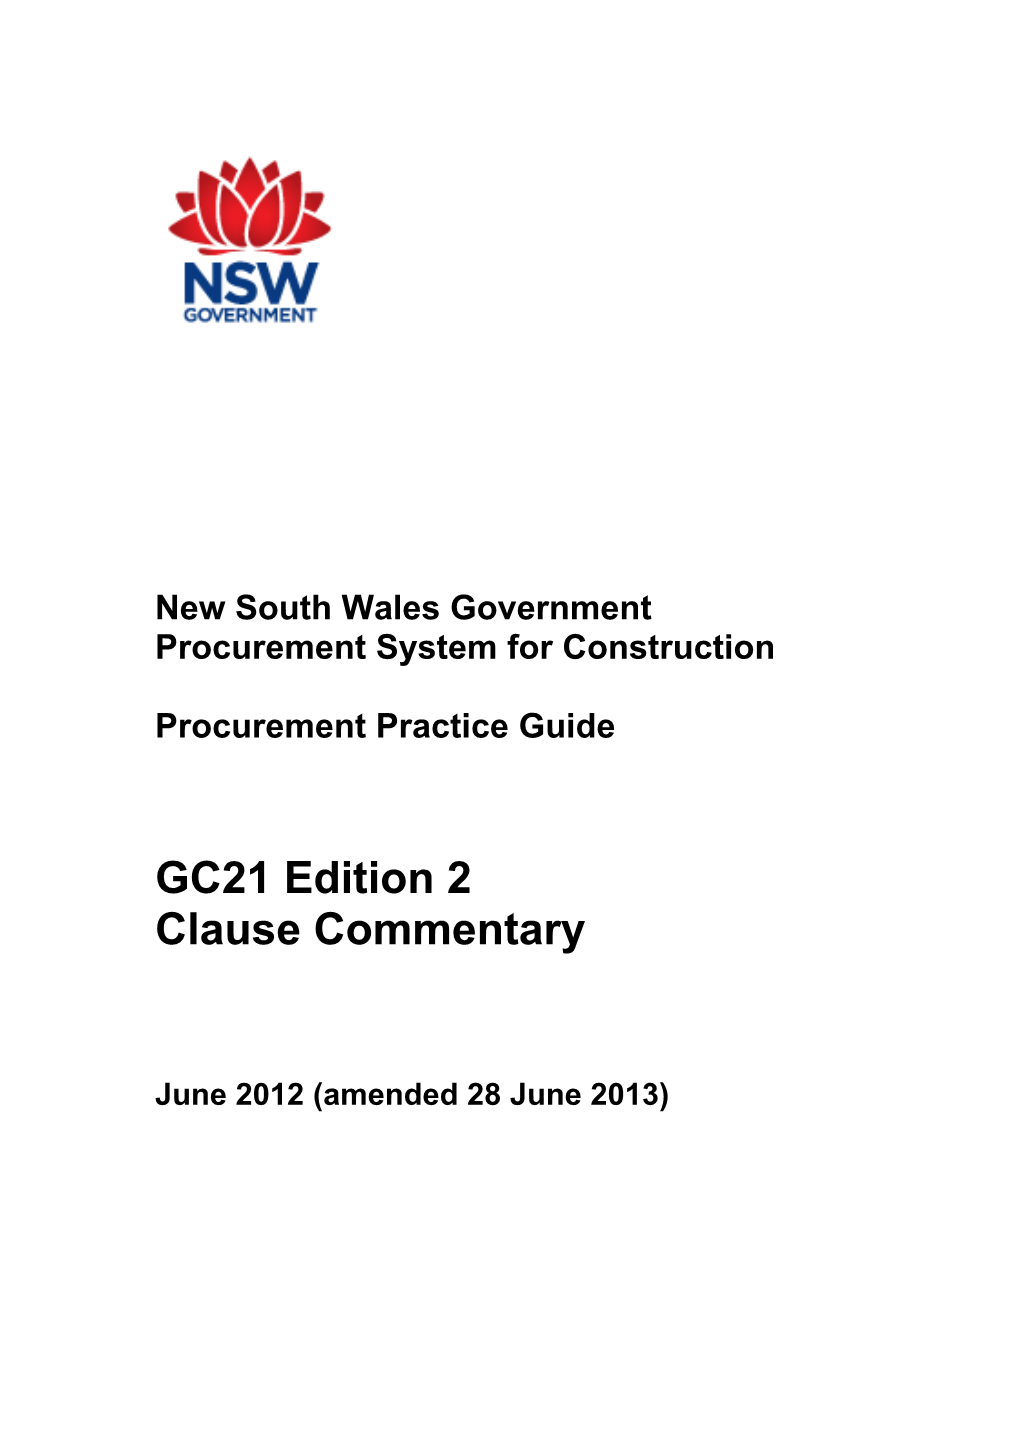 New South Wales Government Procurement System for Construction